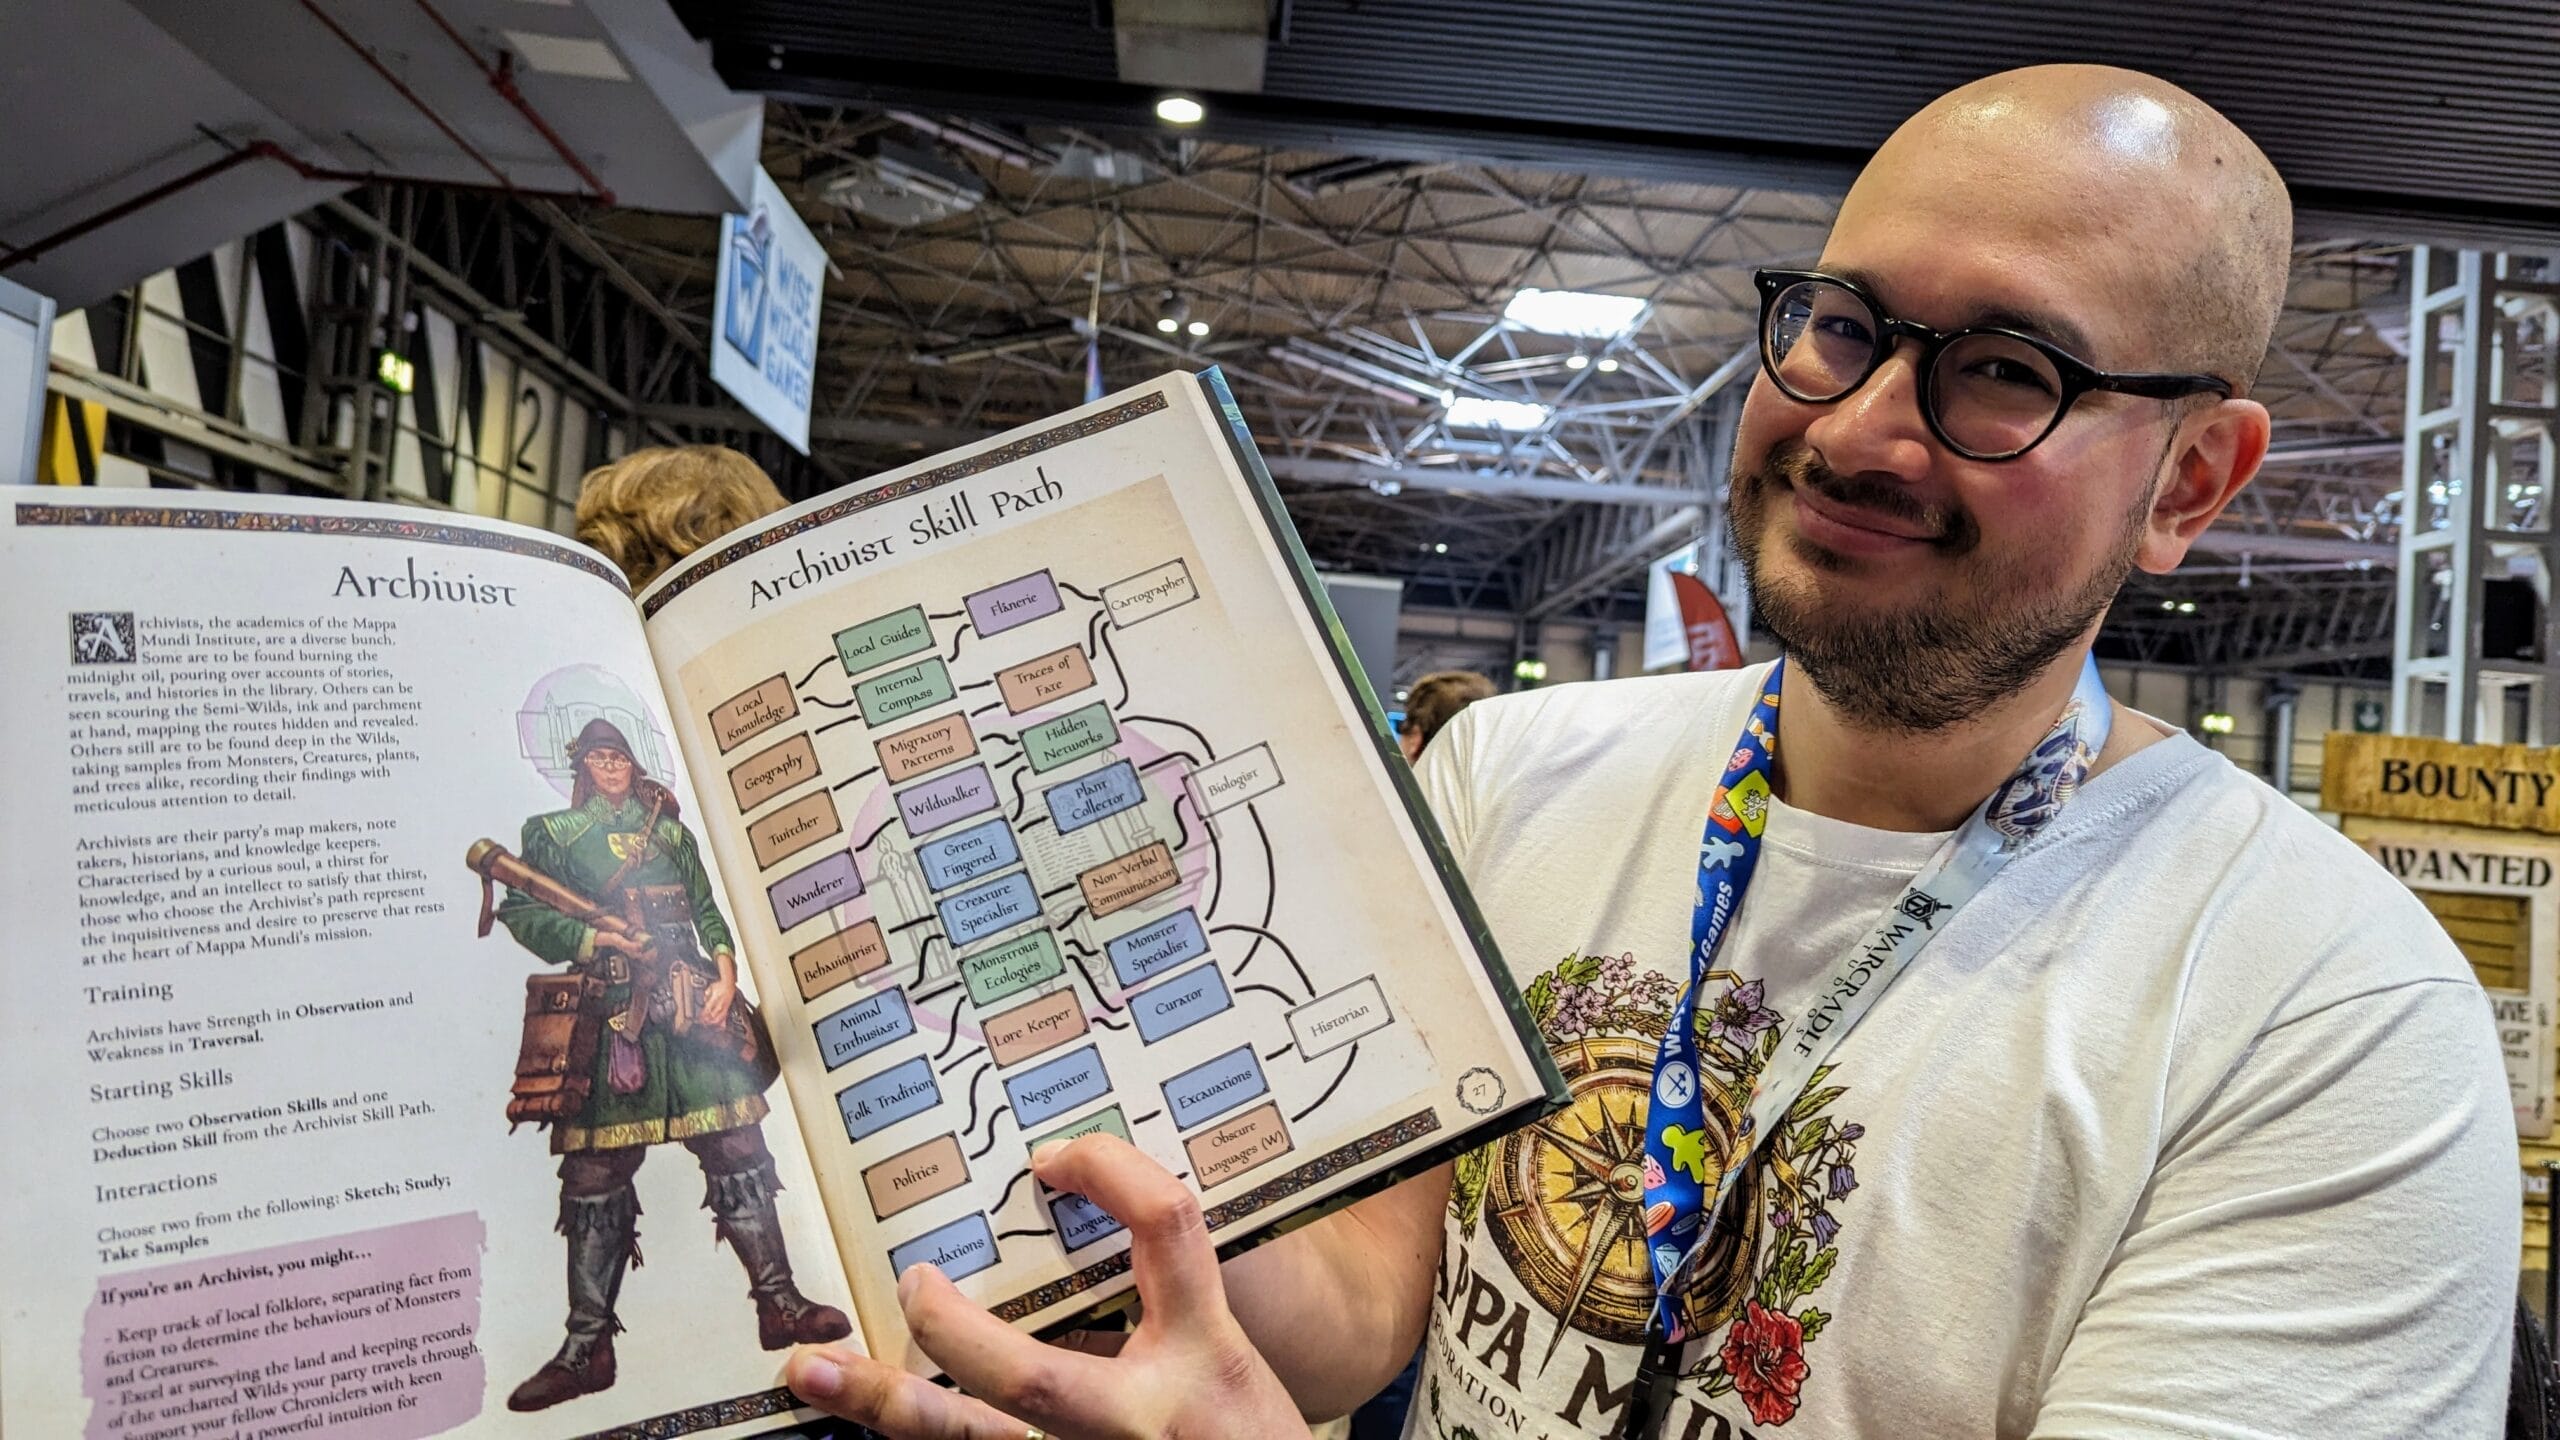 AUthor holds book open to show skill trees and a character type